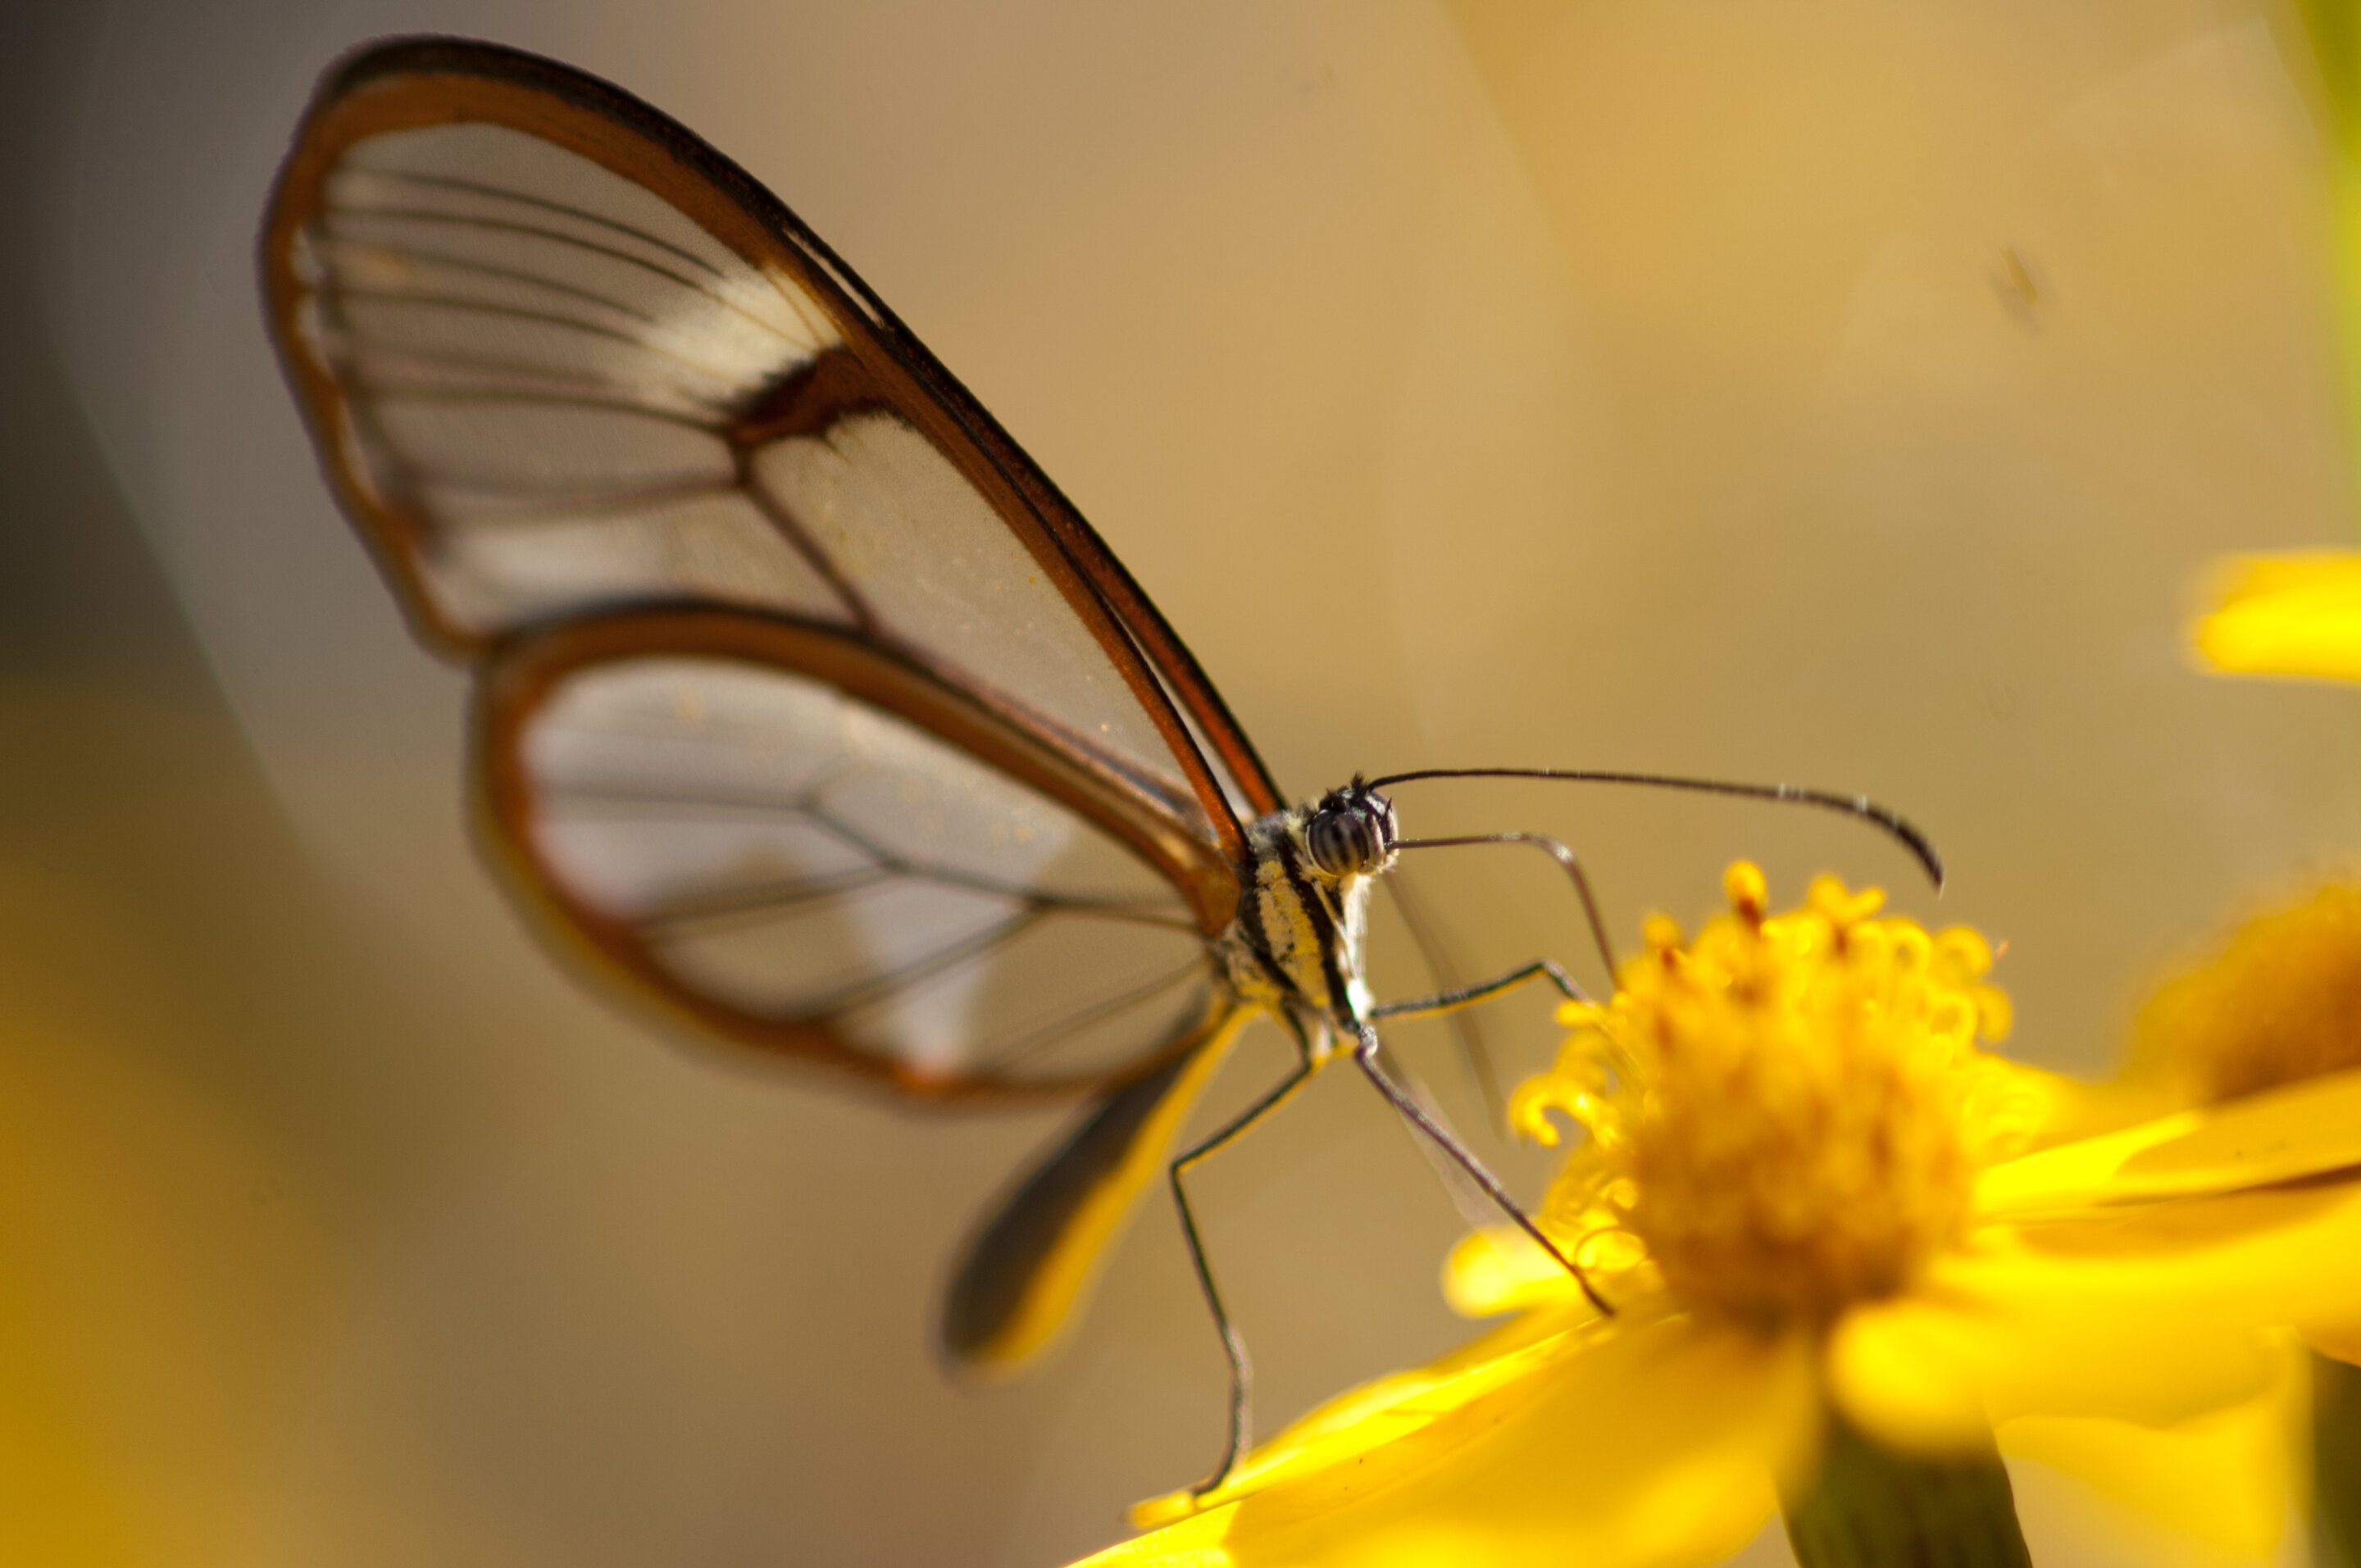 Map of transparent butterflies highlights biodiversity hotspot in the Andes Moun..